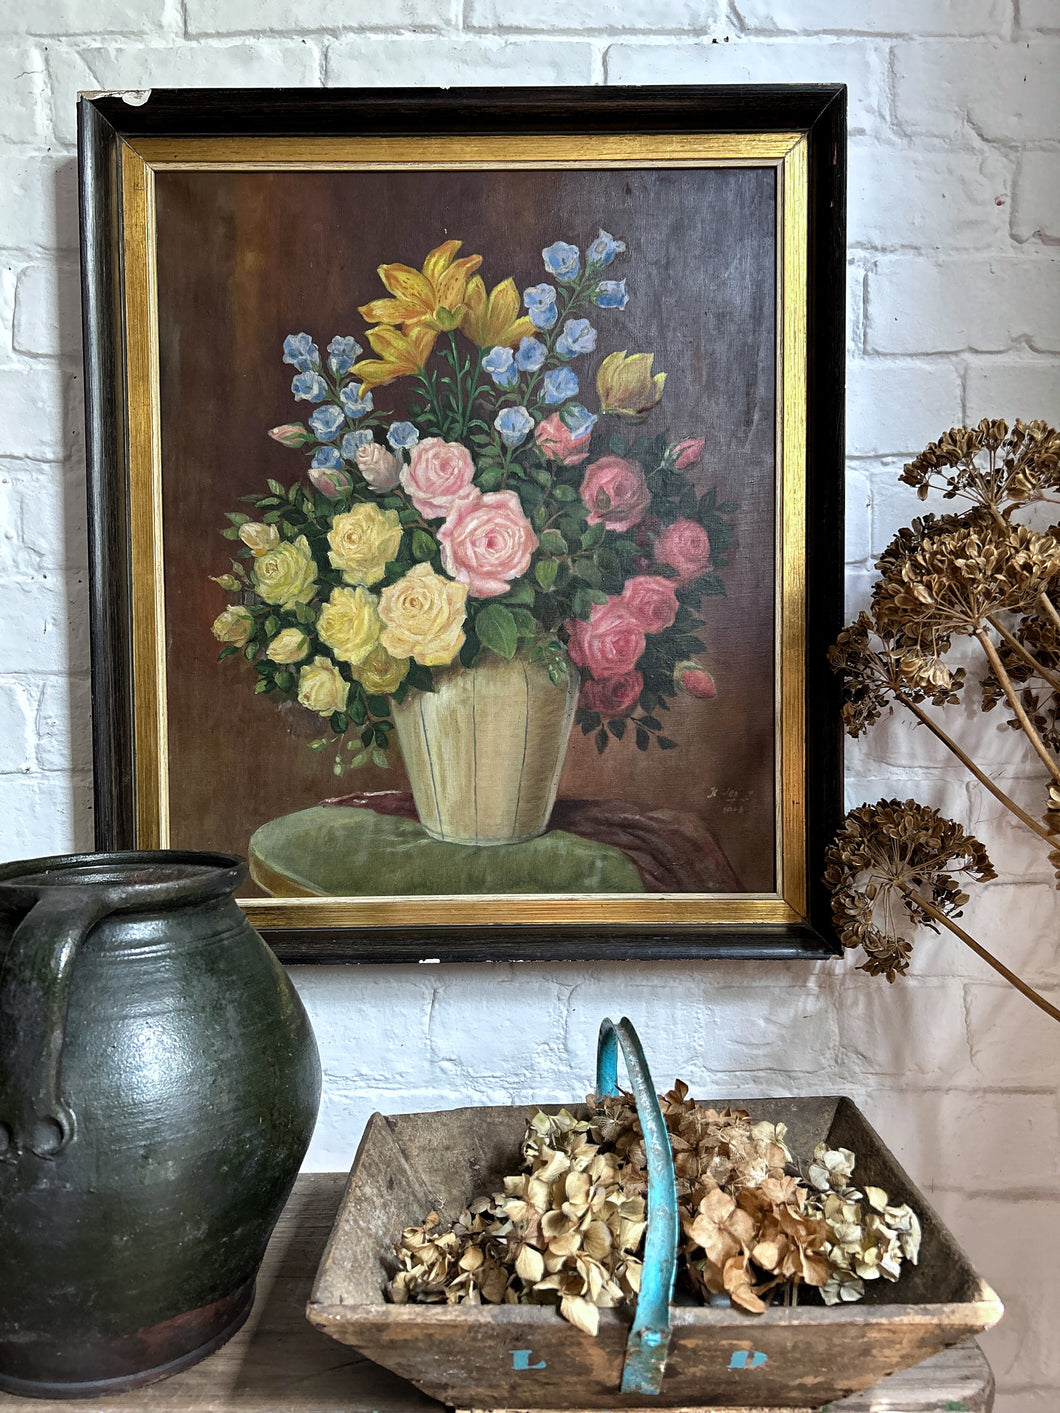 Vintage 1940's floral still life oil painting on canvas signed